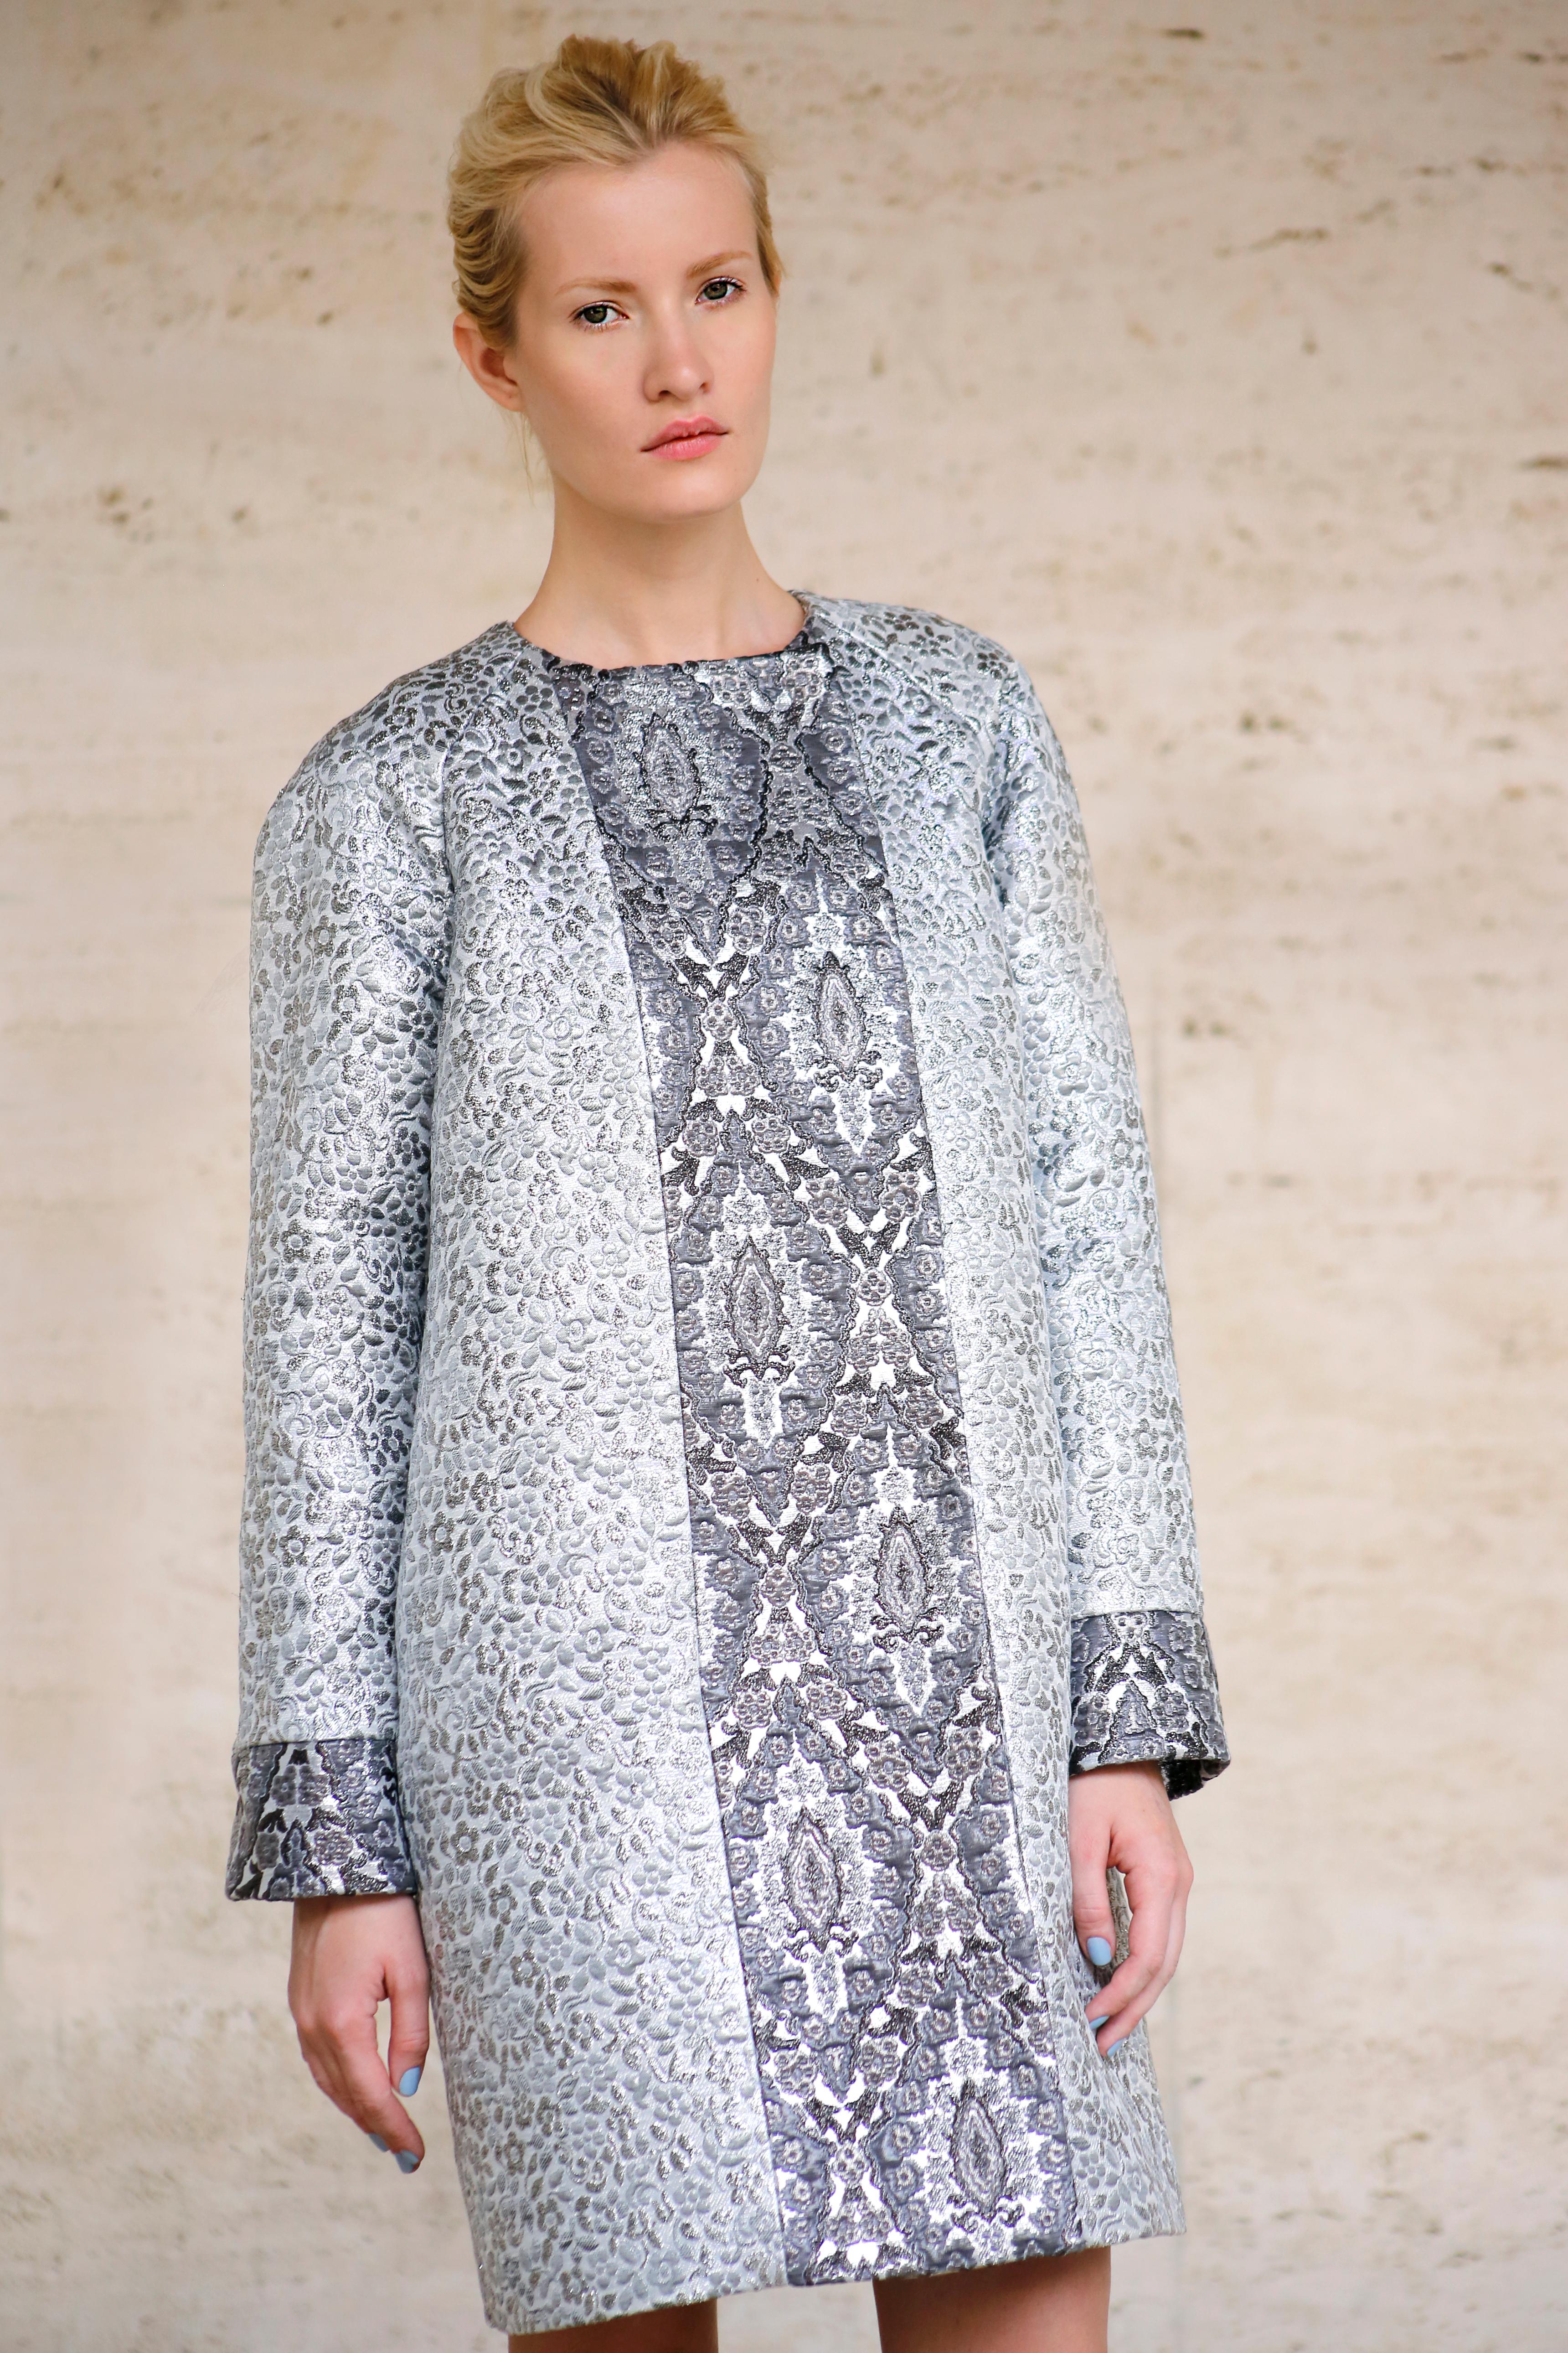 The Elise Pelush silver brocade coat is a one of a kind exclusive piece. Featuring a rare Italian Haute Couture metallic brocade fabrics in Damask and floral cloque' emboss, this fabulous fashion statement coat has iridescent opaline threads